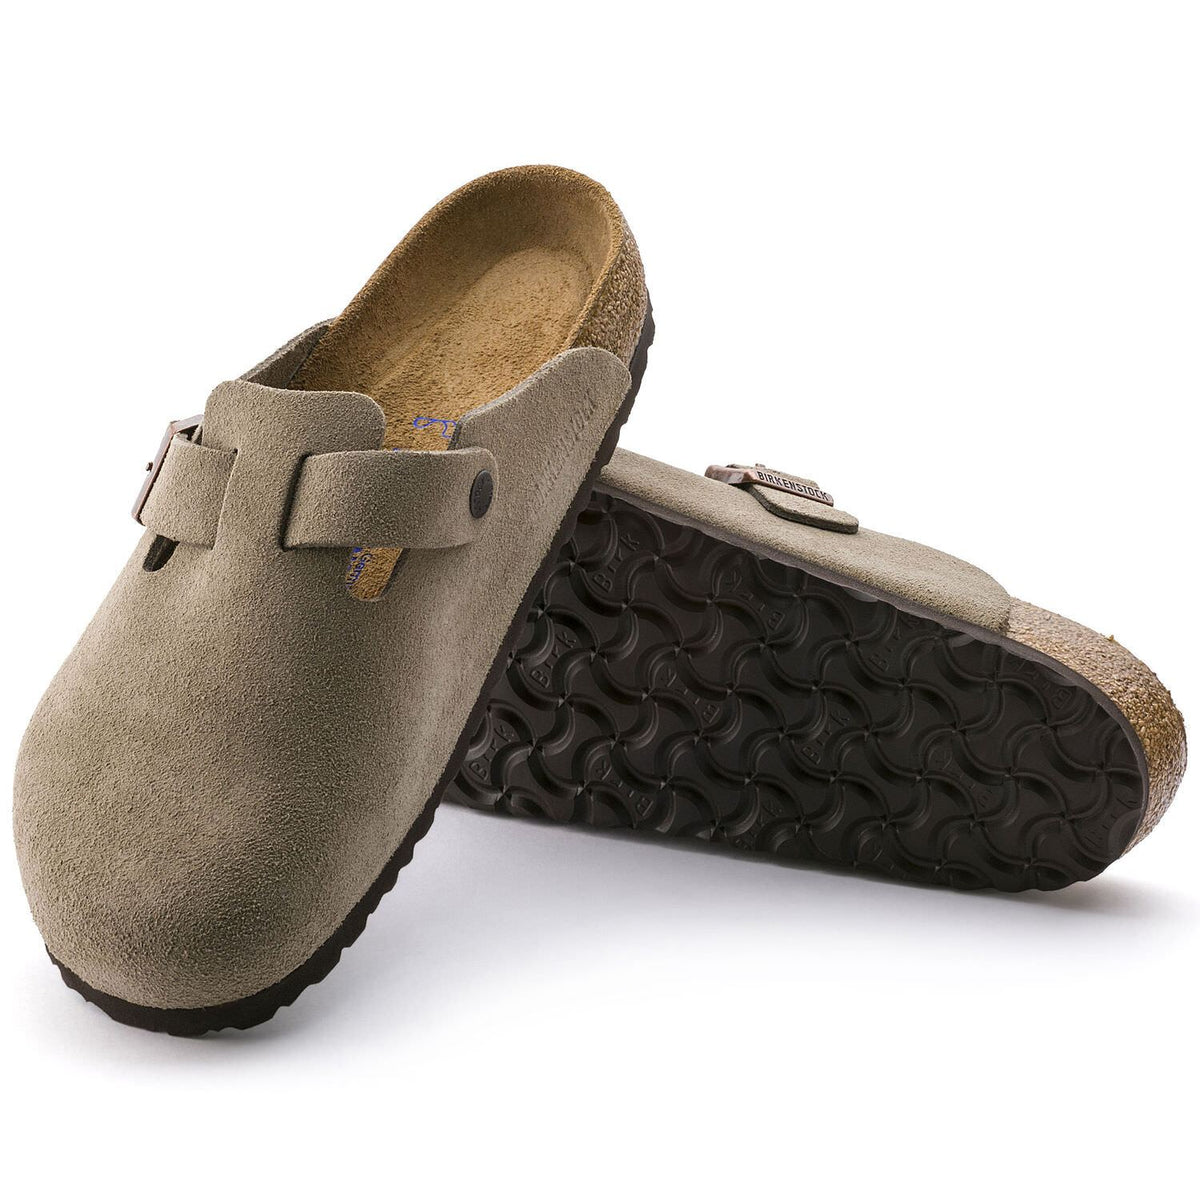 Birkenstock Boston, Narrow Fit, Soft Footbed, Suede Leather, Taupe Clogs Birkenstock Classic 